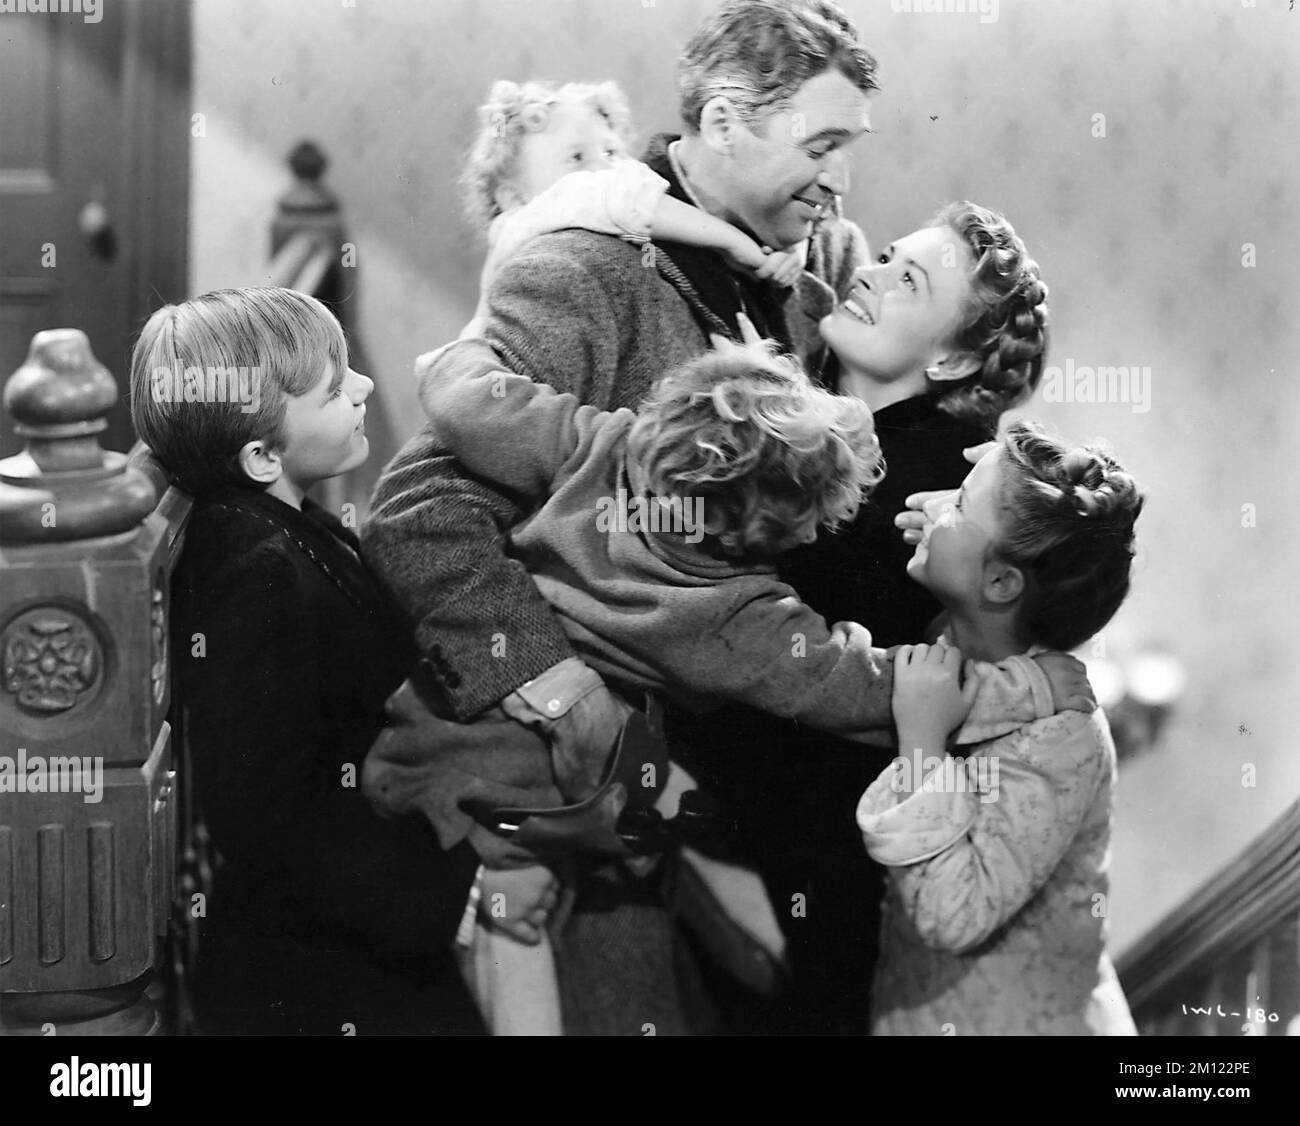 IT'S A WONDERFUL LIFE 1946 RKO Radio Pictures film with Donna Reed and James Stewart Stock Photo